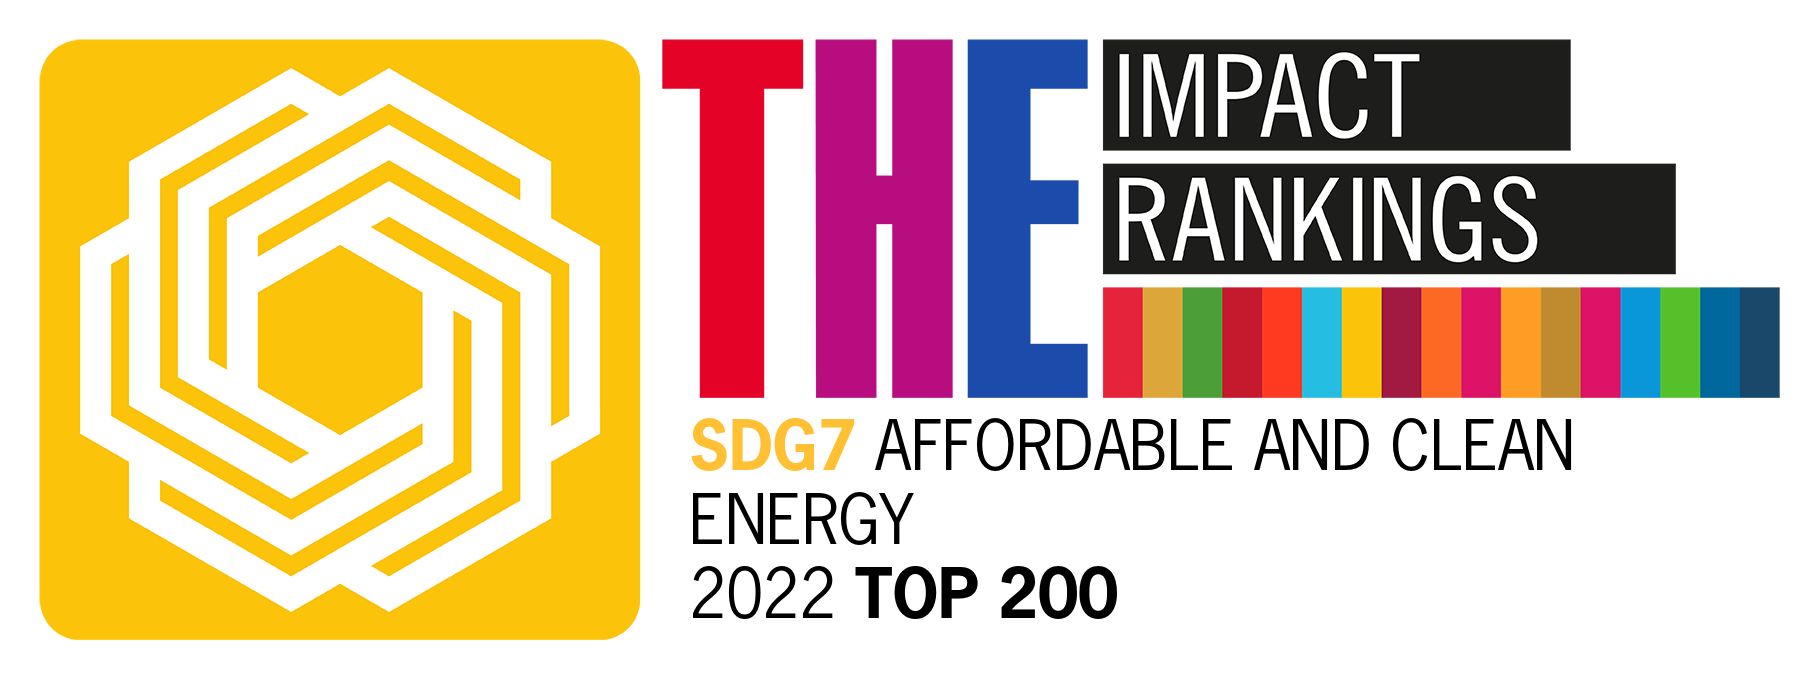 SDG7_ Affordable and Clean Energy - Top 200